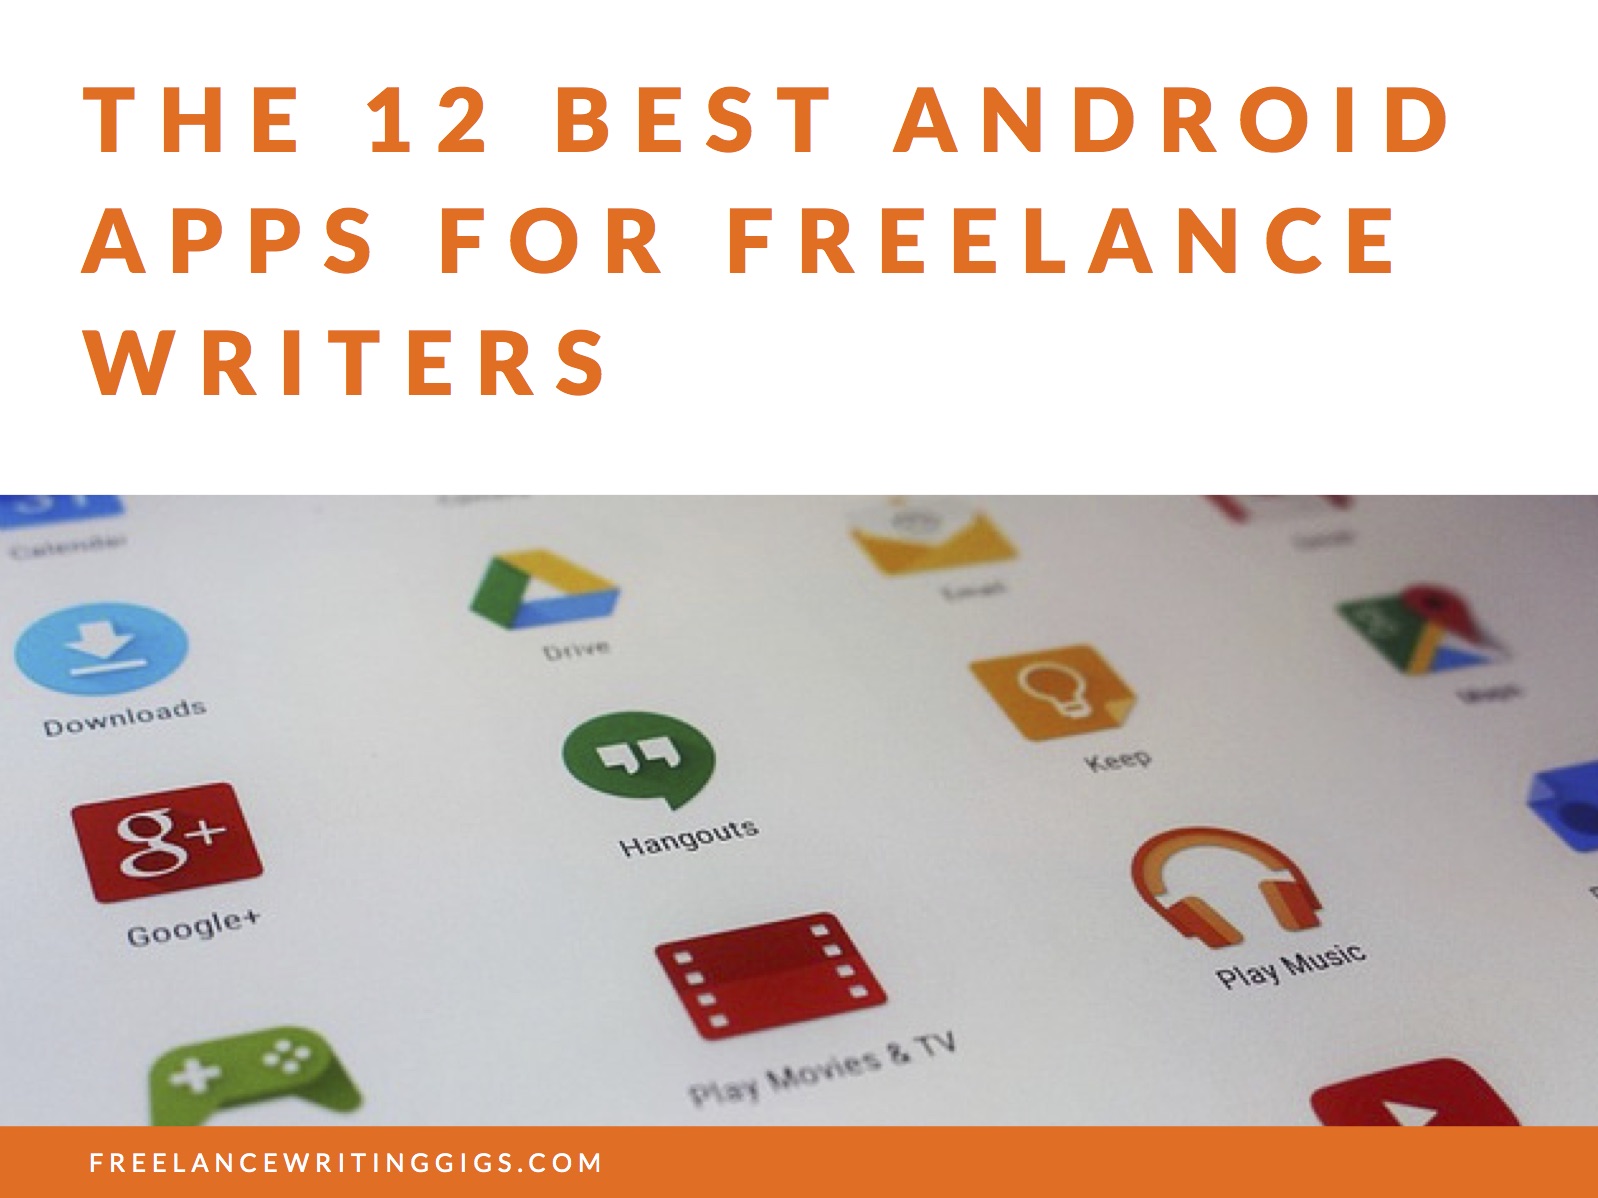 The 12 Best Android Apps for Freelance Writers